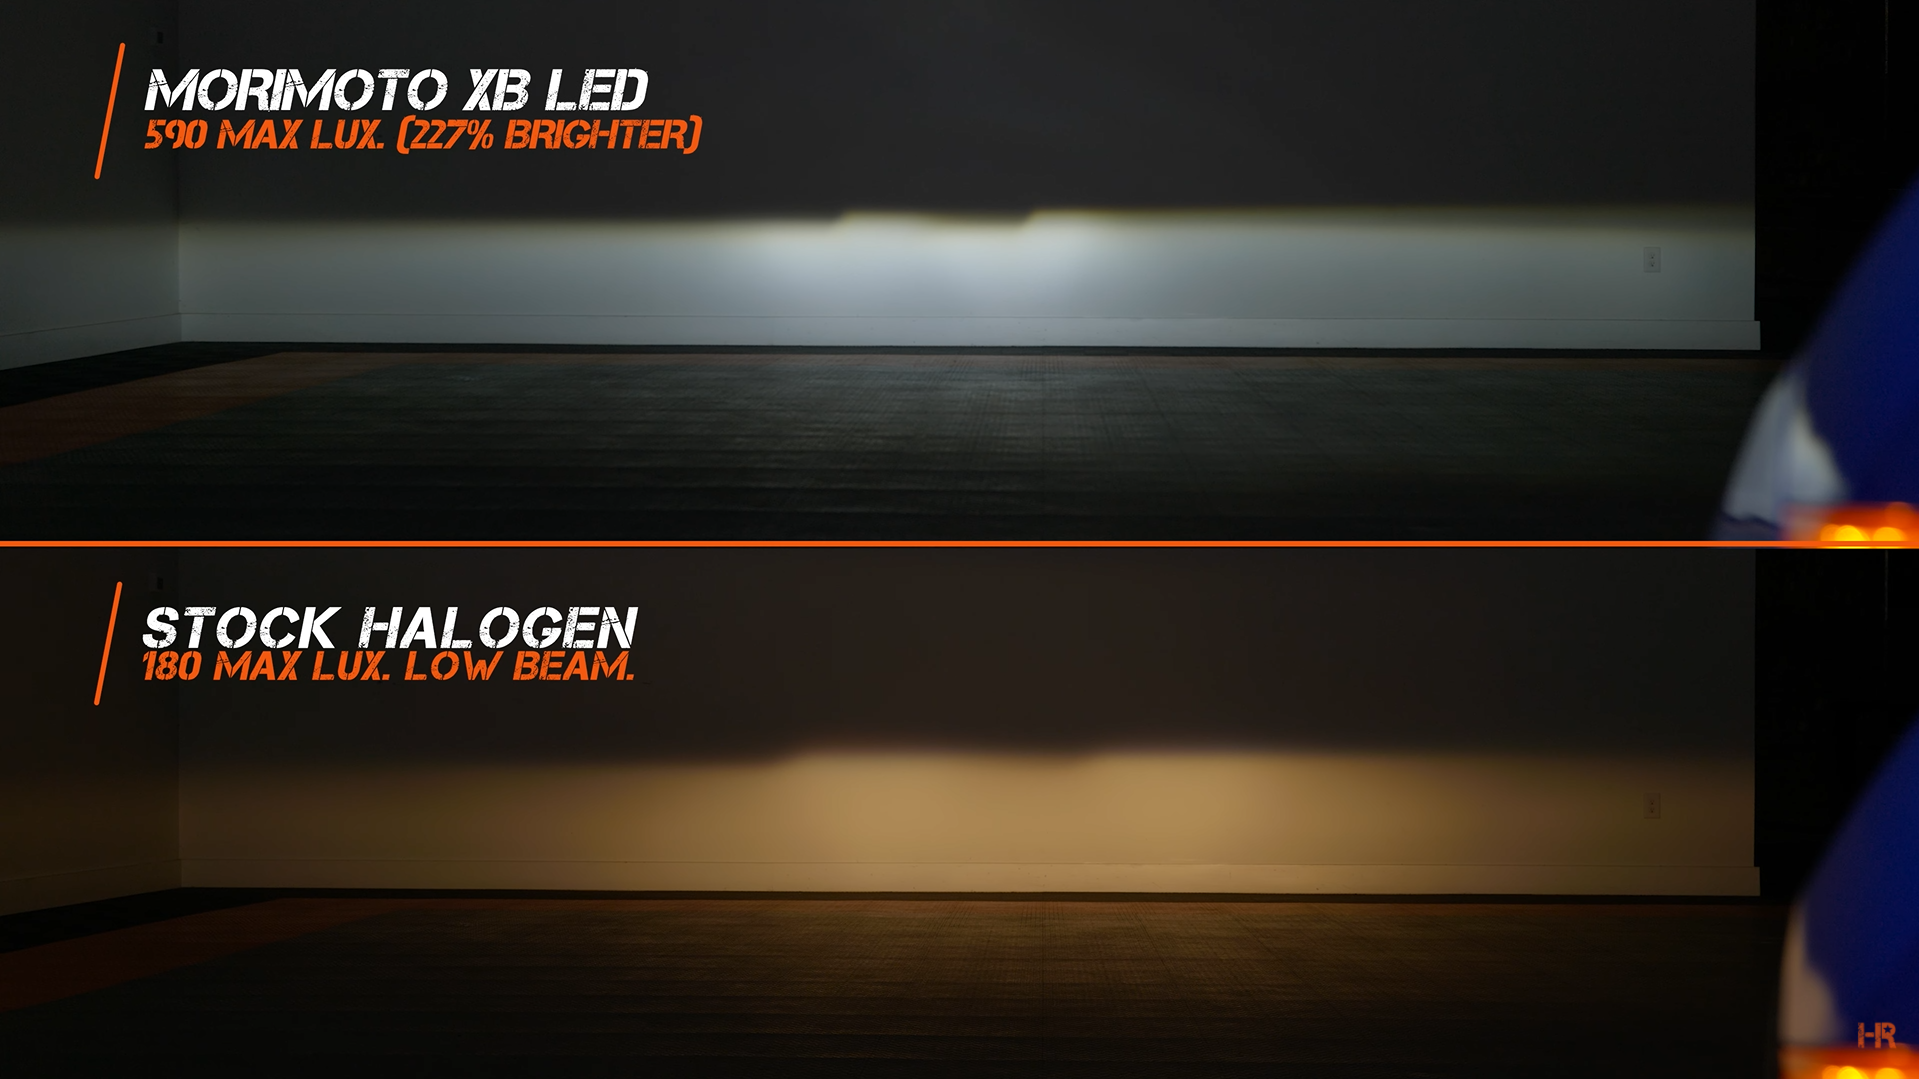 Comparison between the stock halogen and Morimoto XB LED headlight on low beam.